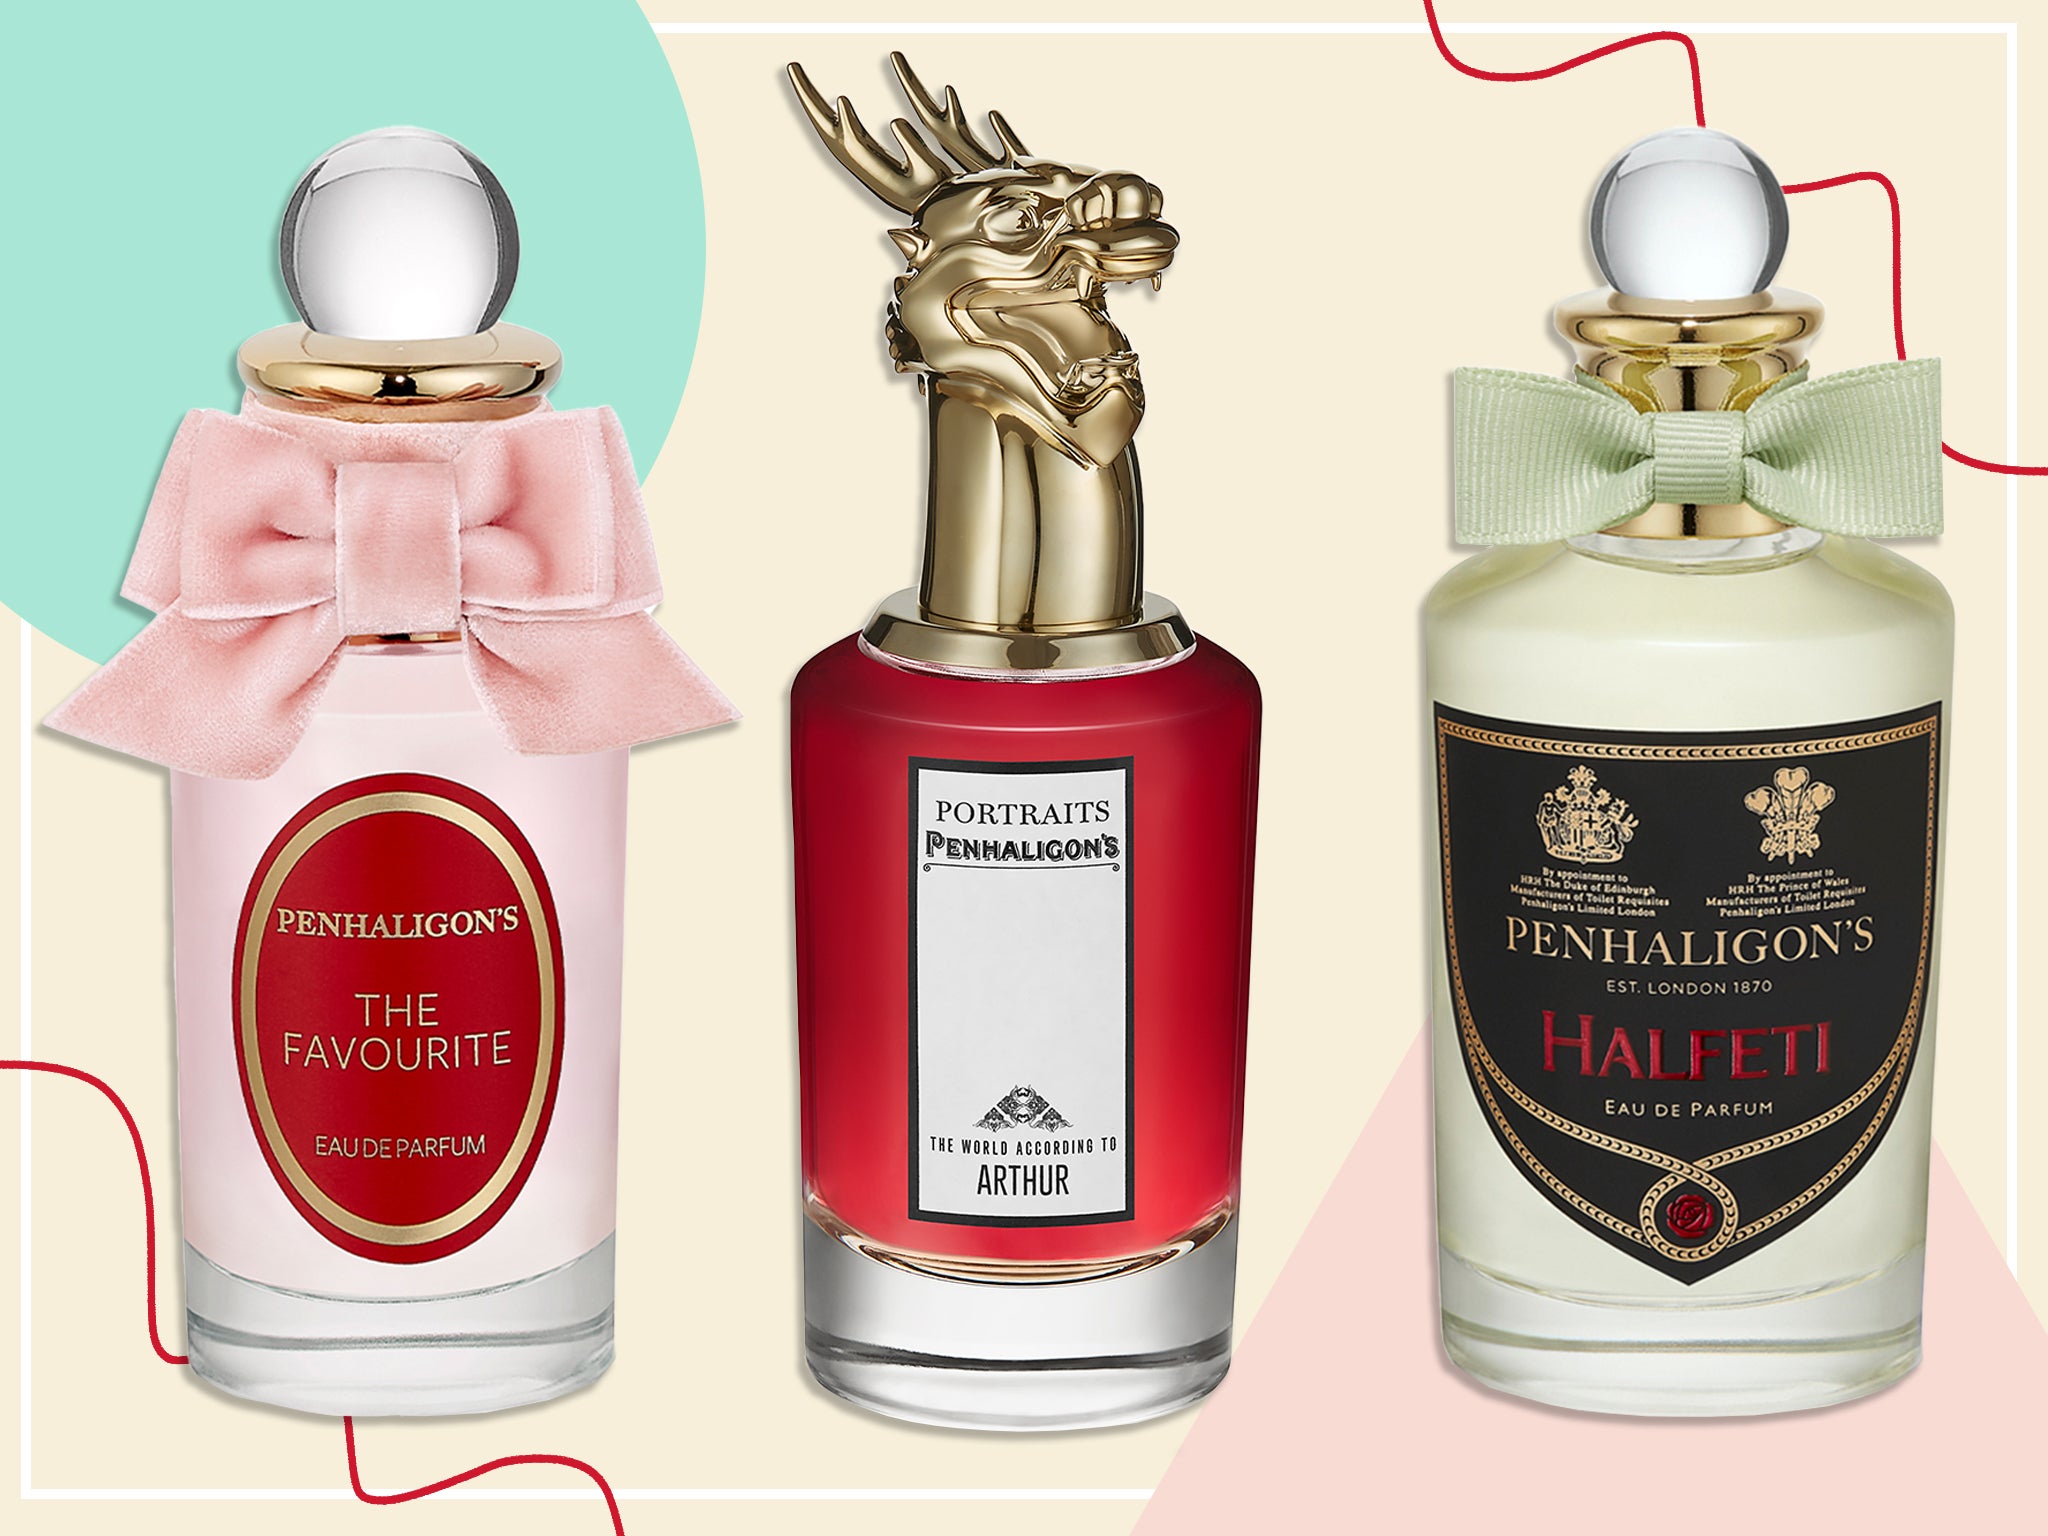 Best-Selling Perfumes - Women and Men